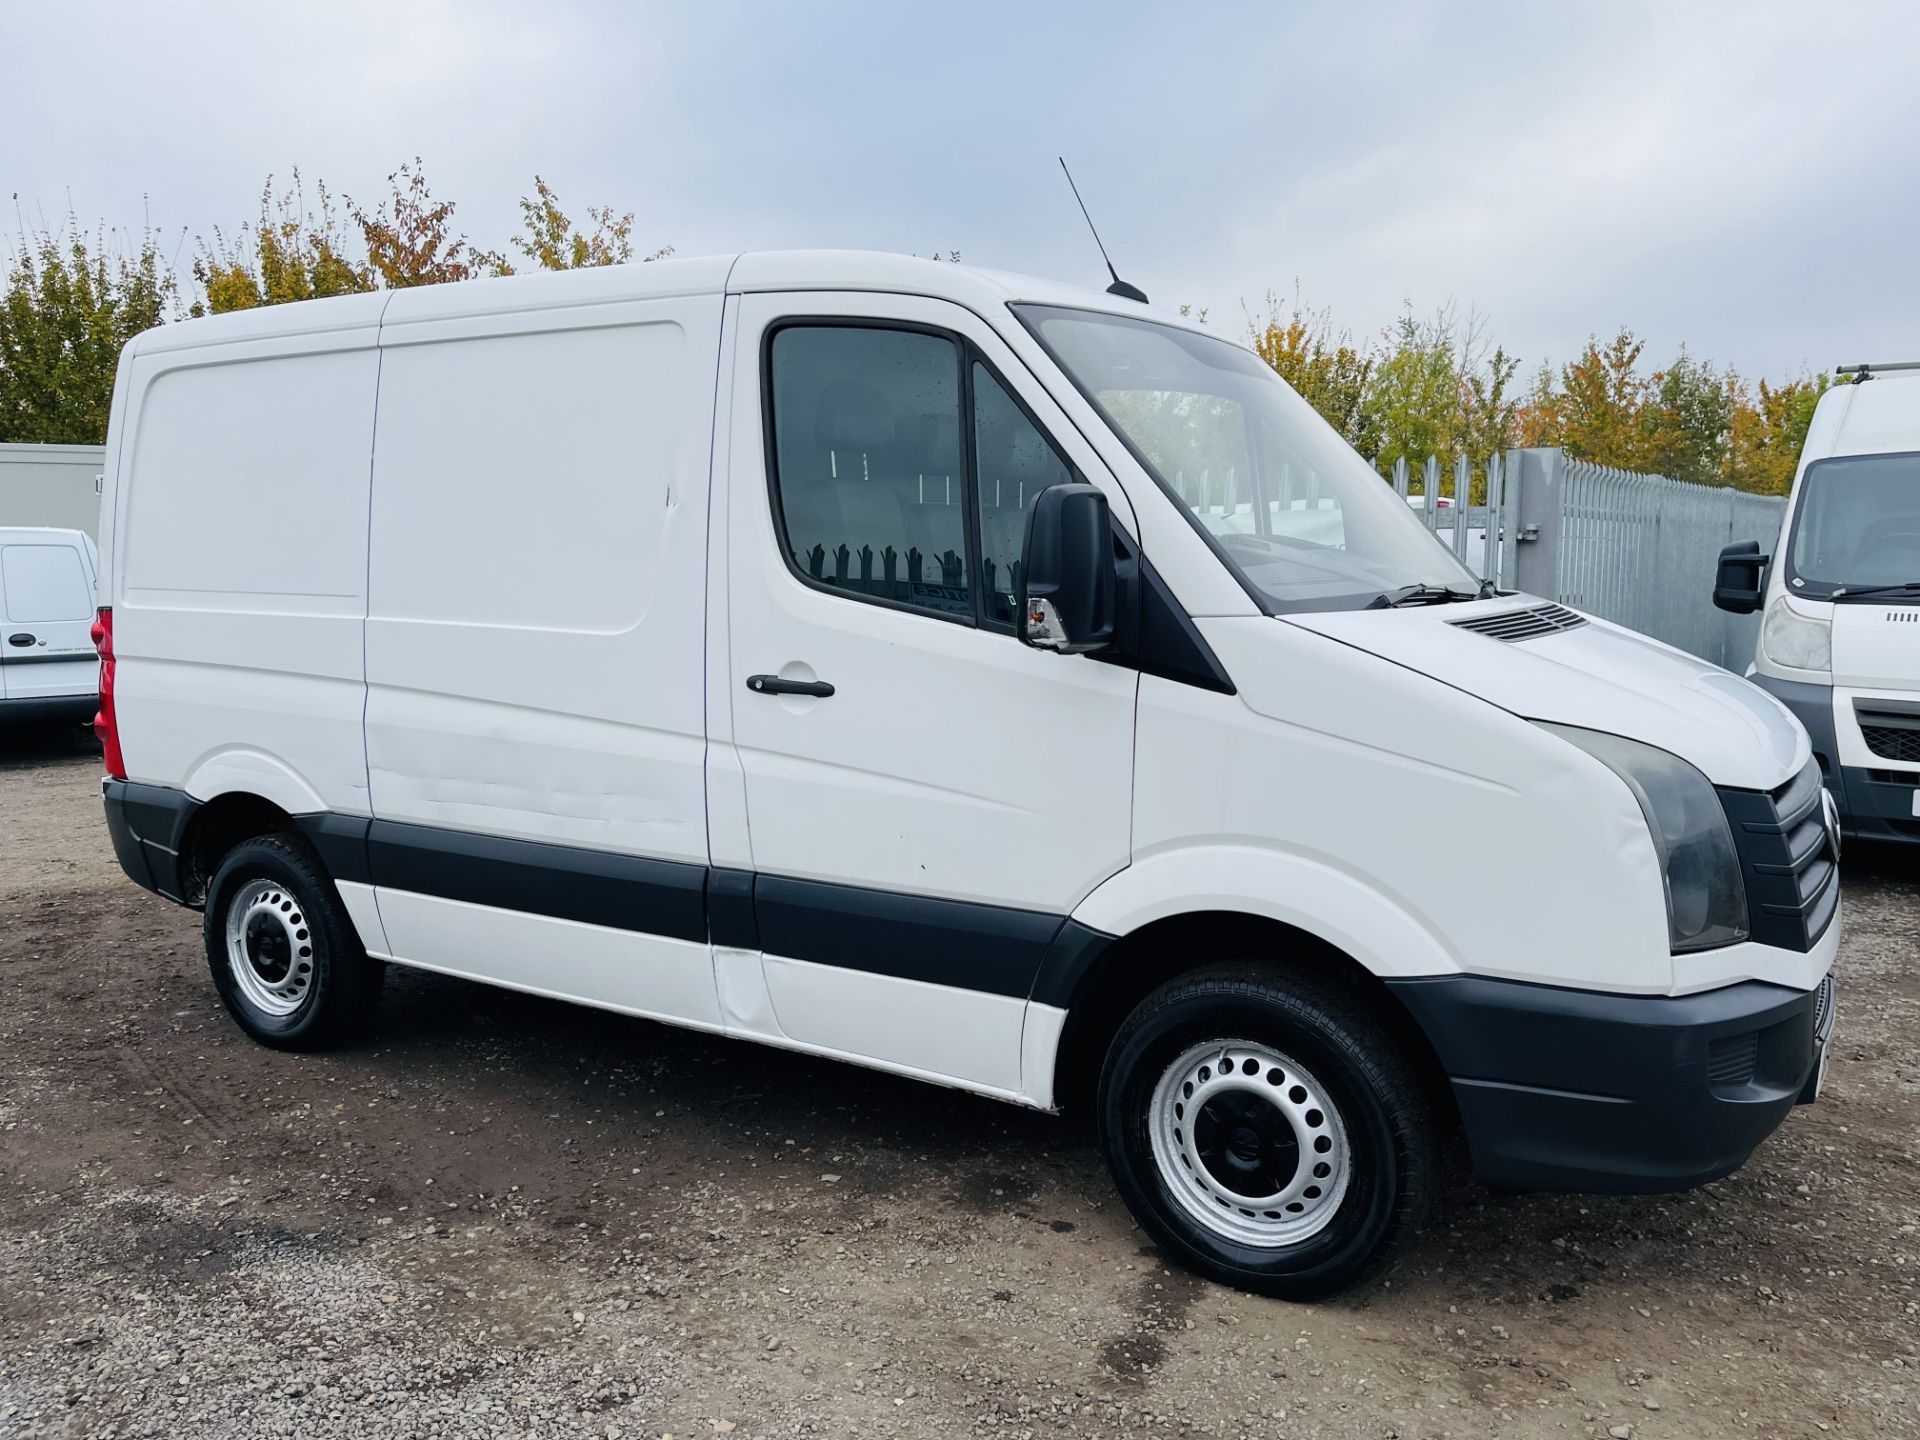 Volkswagen Crafter CR30 2.0 TDI 109 L1 H1 2012 ' 62 Reg' - Air Con - No Vat Save 20% - Image 16 of 19